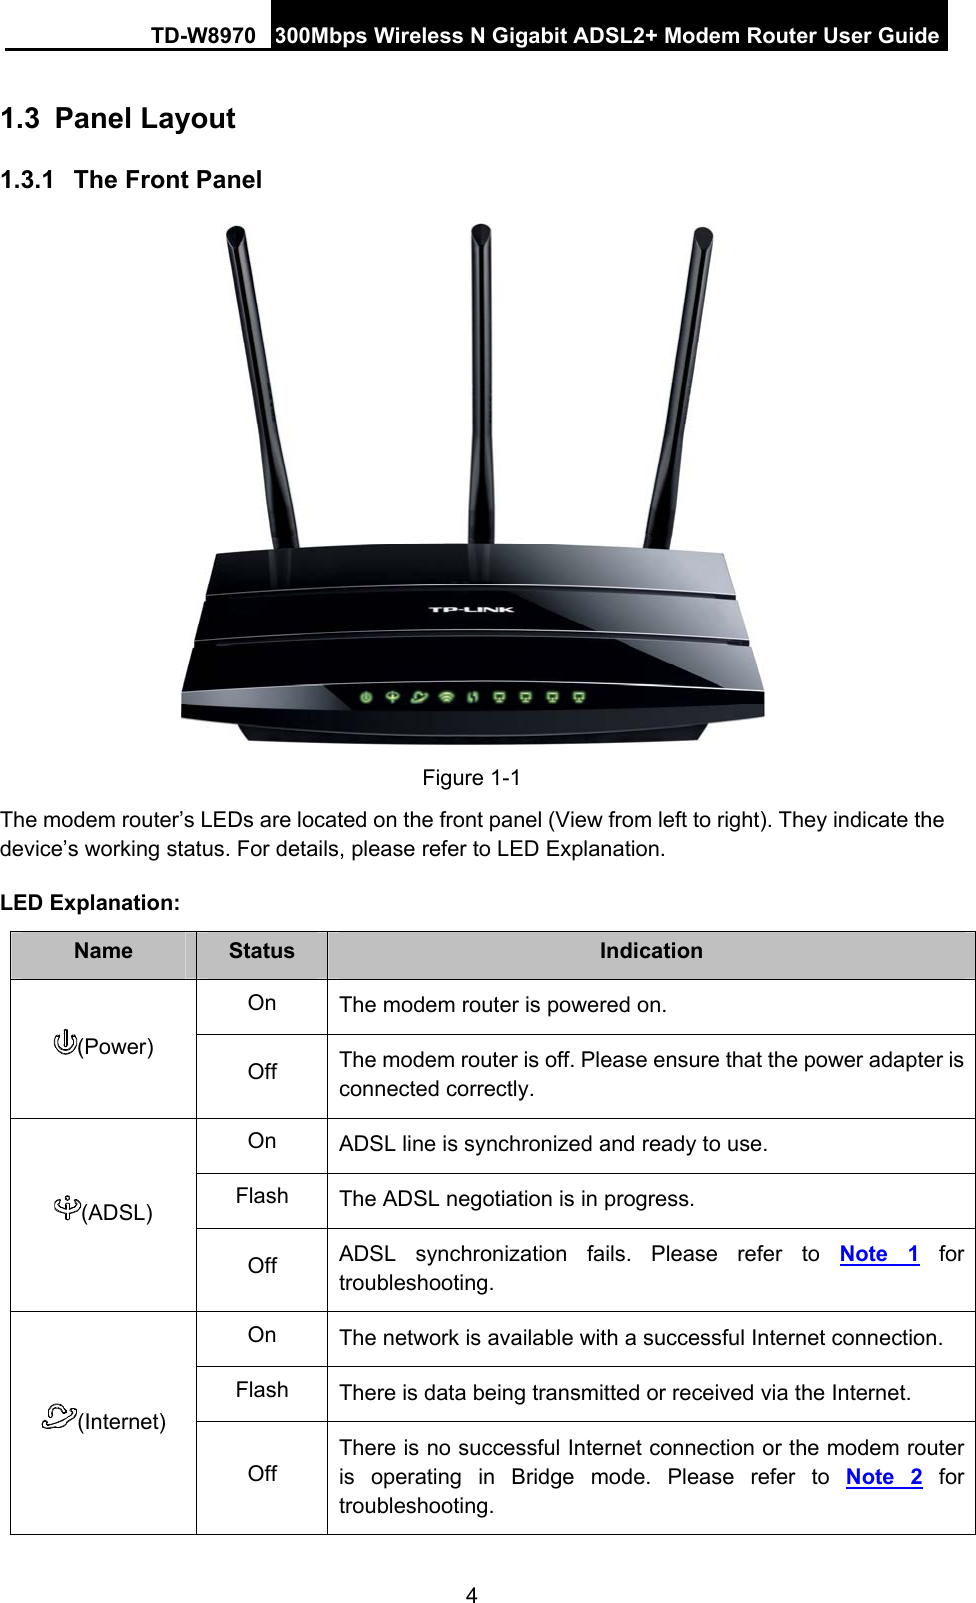 TD-W8970 300Mbps Wireless N Gigabit ADSL2+ Modem Router User Guide 4 1.3  Panel Layout 1.3.1  The Front Panel  Figure 1-1 The modem router’s LEDs are located on the front panel (View from left to right). They indicate the device’s working status. For details, please refer to LED Explanation. LED Explanation: Name  Status  Indication On  The modem router is powered on. (Power) Off The modem router is off. Please ensure that the power adapter is connected correctly. On ADSL line is synchronized and ready to use. Flash The ADSL negotiation is in progress. (ADSL) Off ADSL synchronization fails. Please refer to Note 1 for troubleshooting. On The network is available with a successful Internet connection.   Flash There is data being transmitted or received via the Internet. (Internet) Off There is no successful Internet connection or the modem router is operating in Bridge mode. Please refer to Note 2 for troubleshooting. 